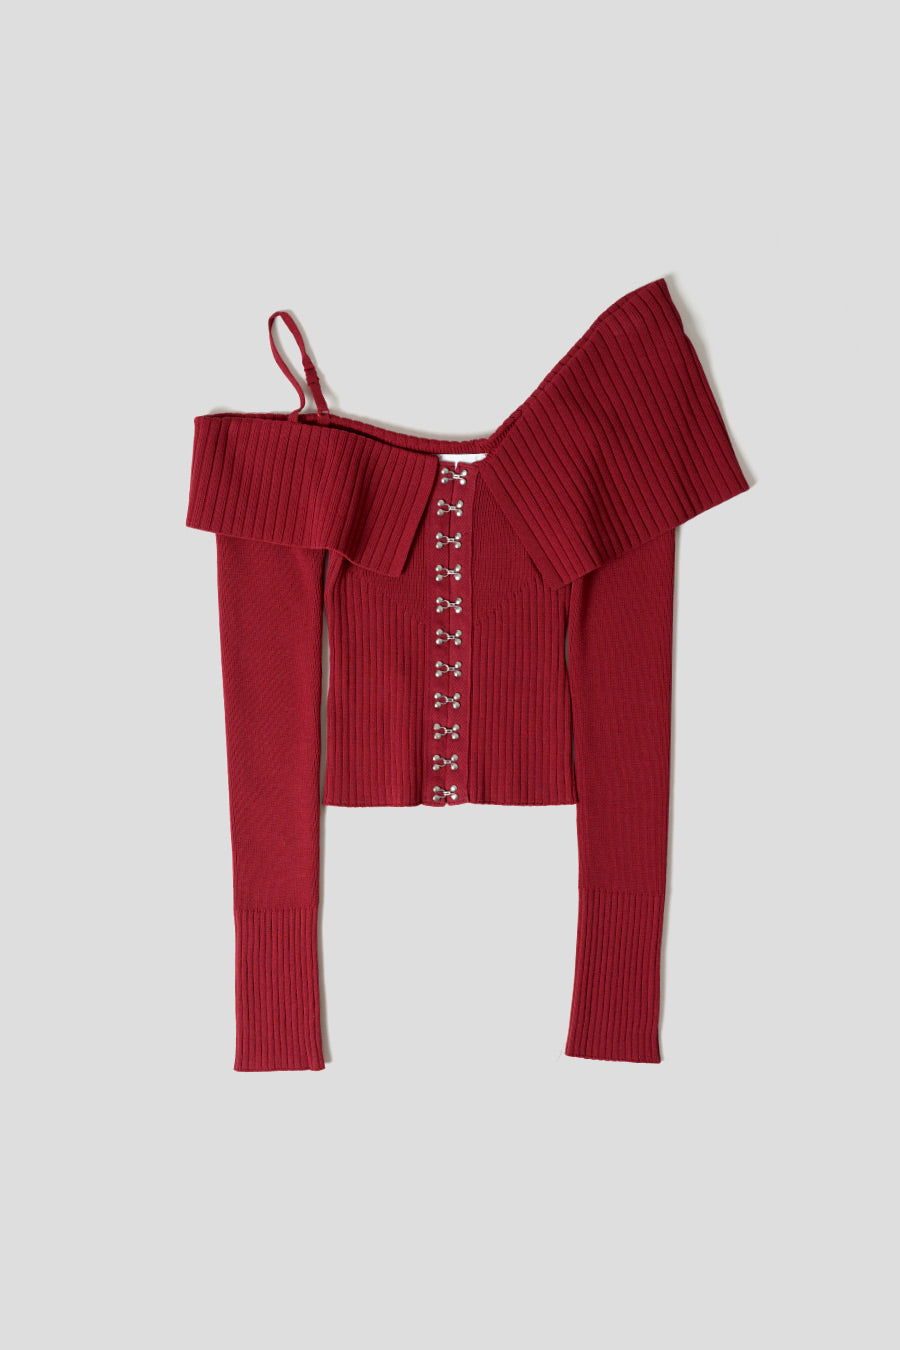 house of sunny - TRICOT ONE LOVE SHOULDER RIB ROUGE - LE LABO STORE